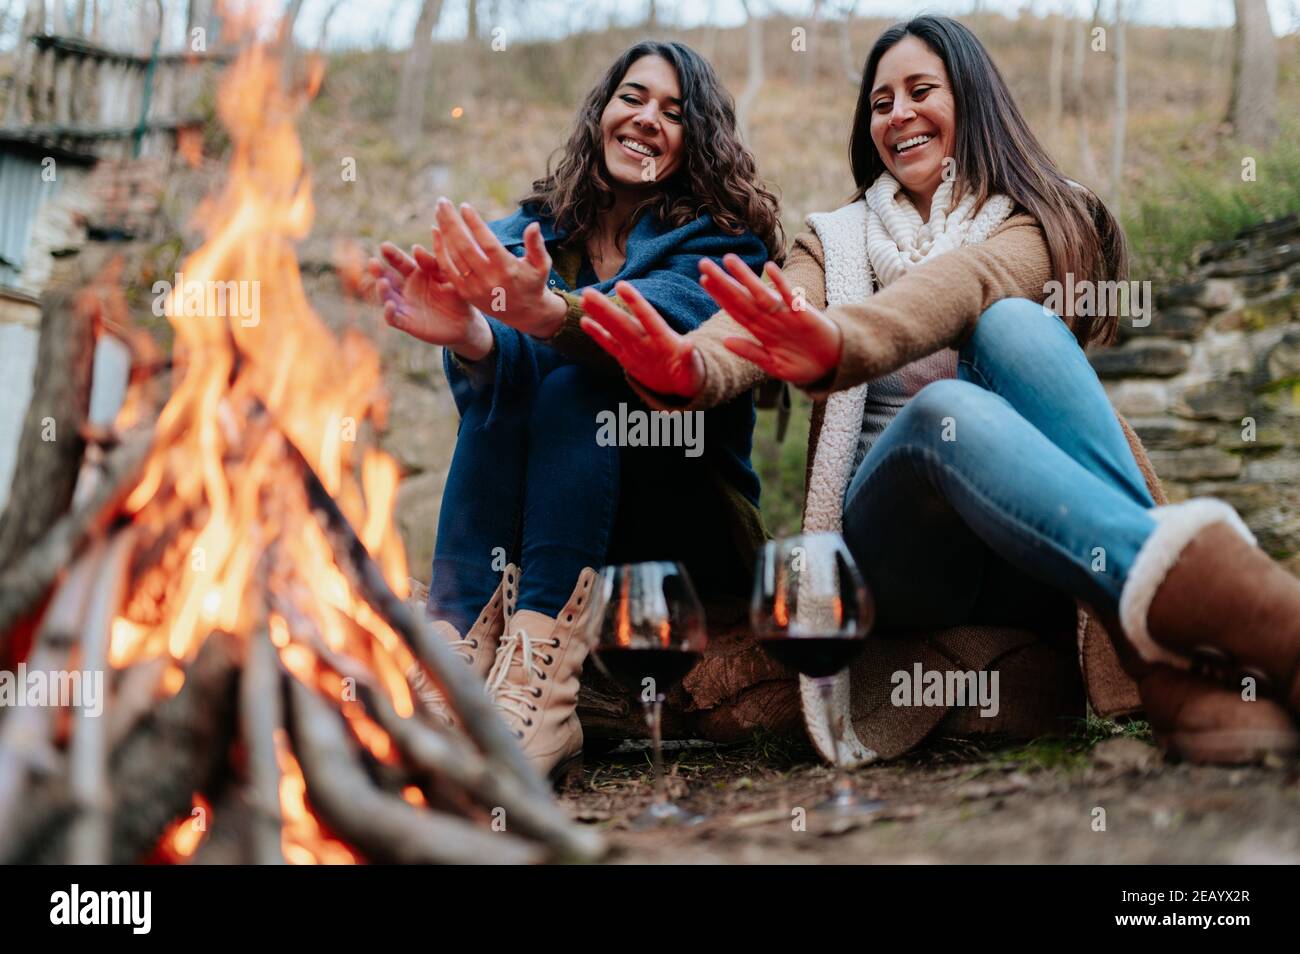 young smiling women warming next to the fire. Glasses of red wine. Campfire, outdoors activities, relaxation, togetherness concept. Stock Photo